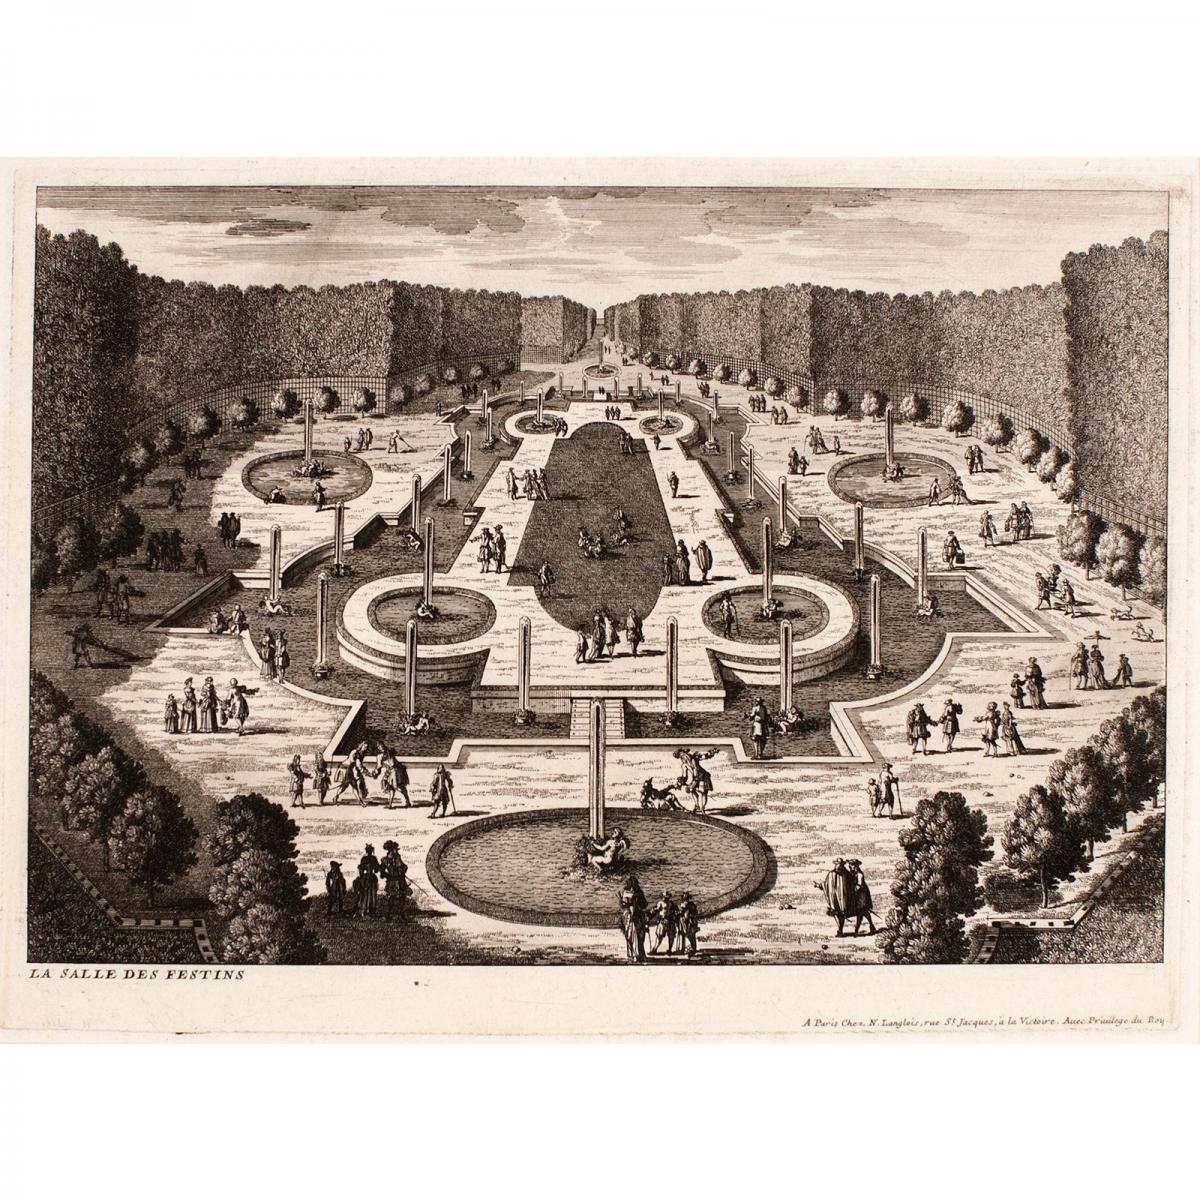 A bird’s eye view of a formal garden with many fountains